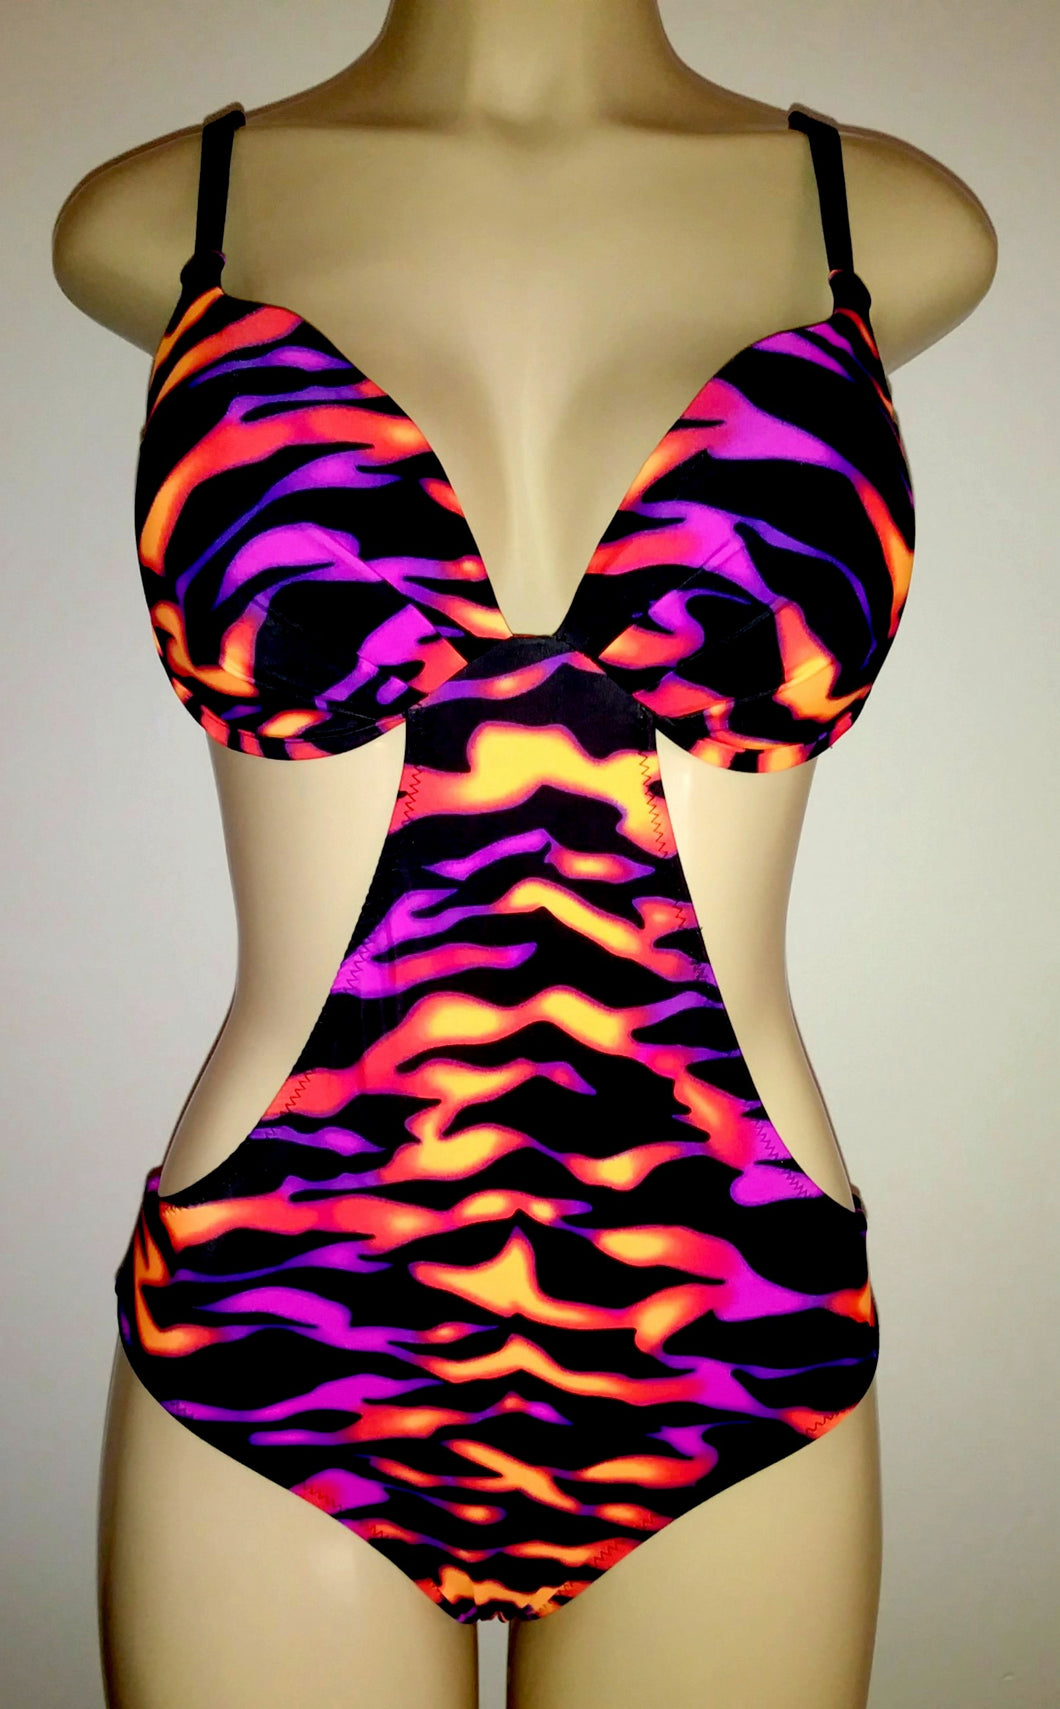 Push up monokini swimsuits. Women's bathing suits one pieces.